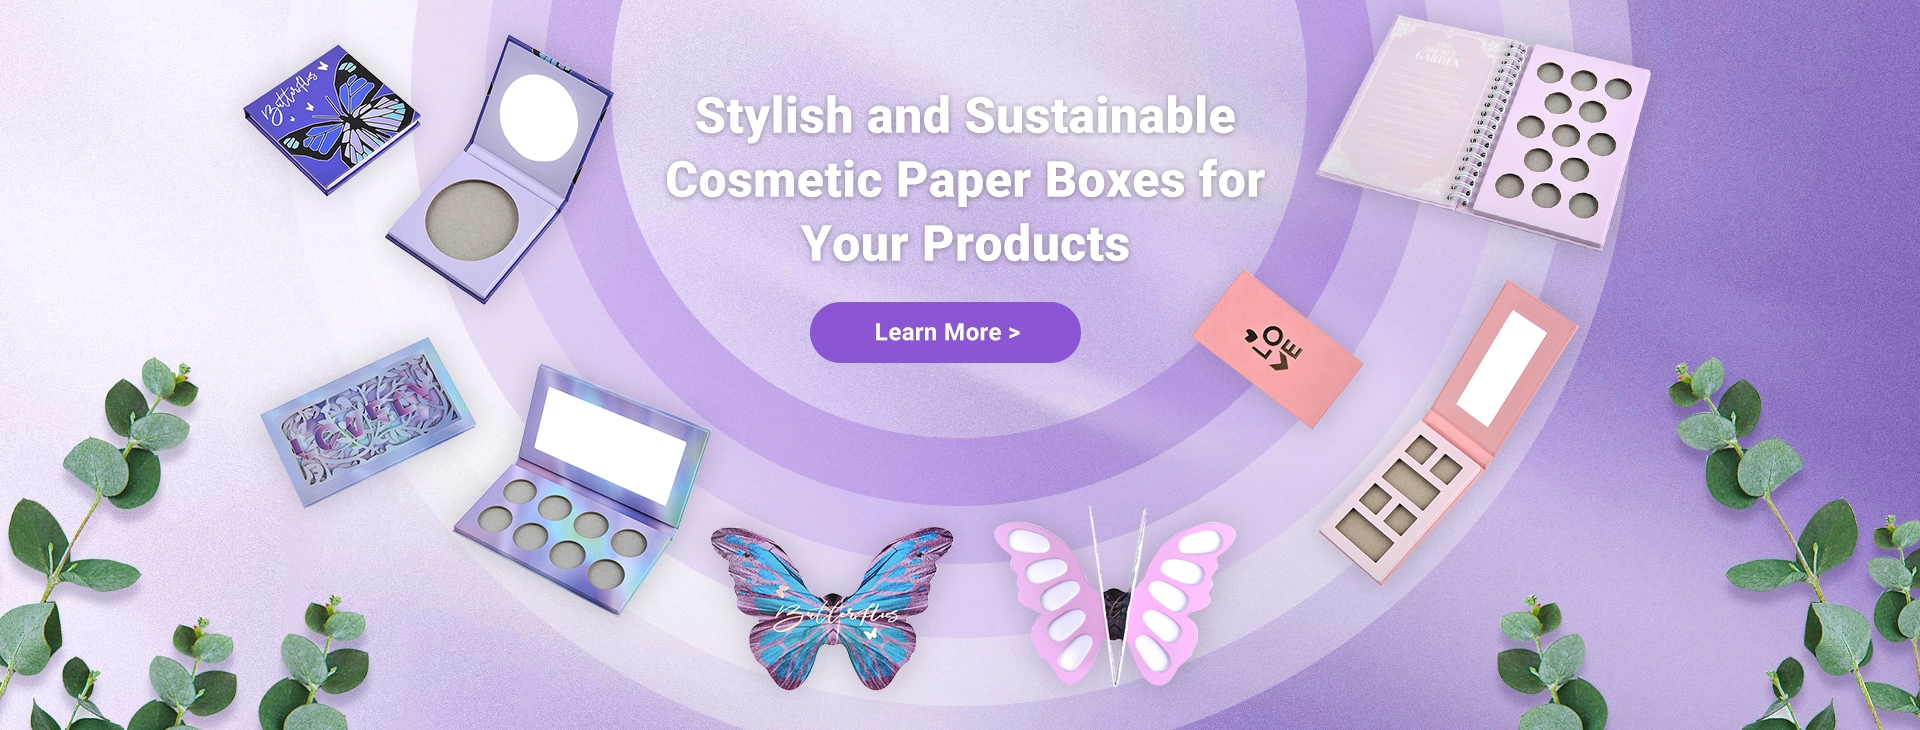 Stylish and Sustainable Cosmetic Paper Boxes for Your Products